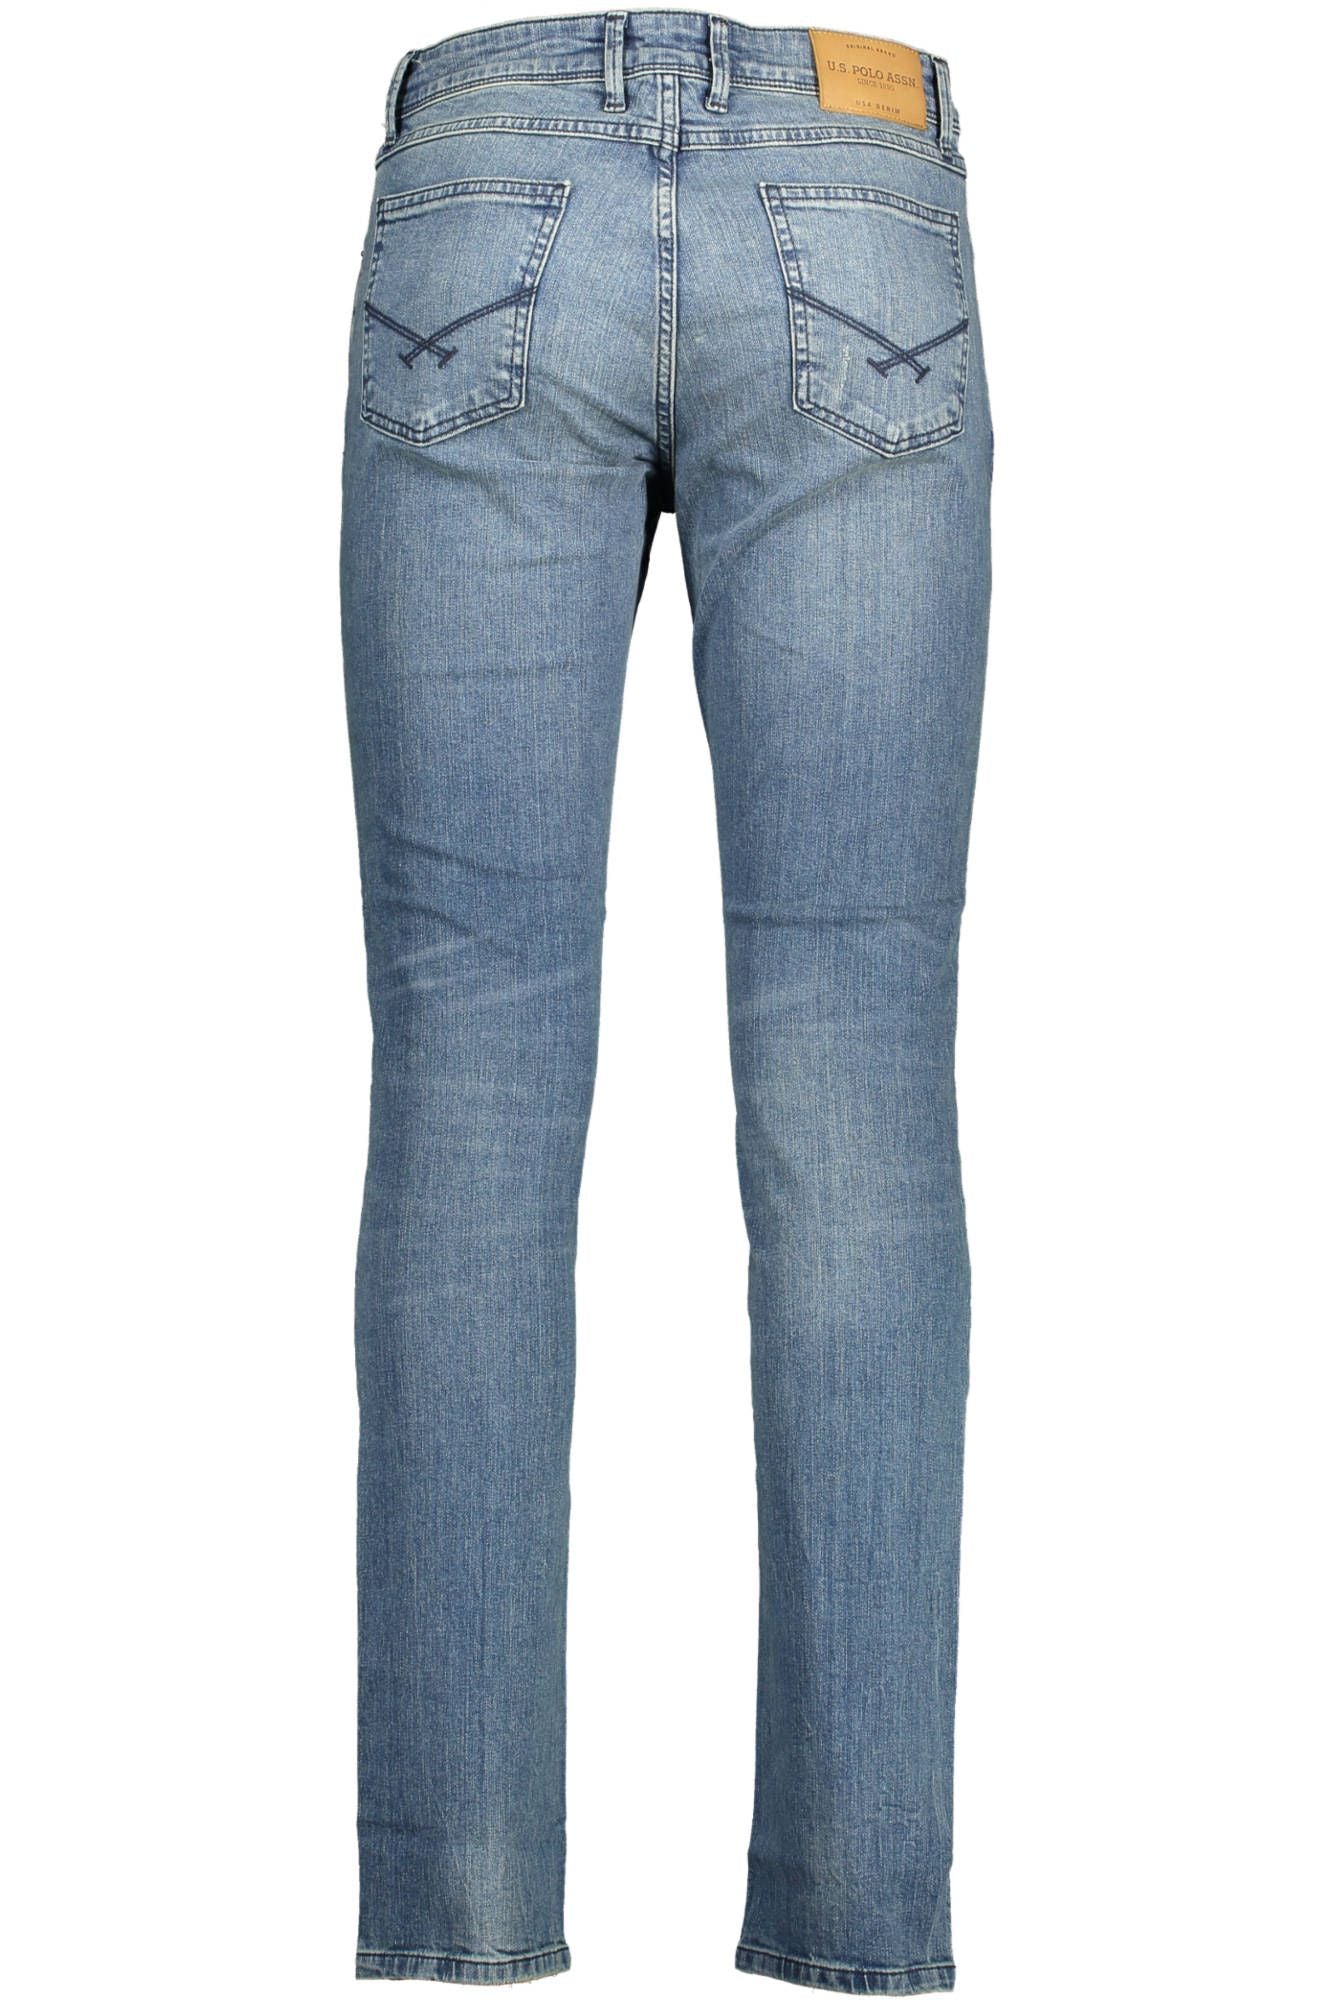 Regular Fit Buttoned Jeans with Worn Effect